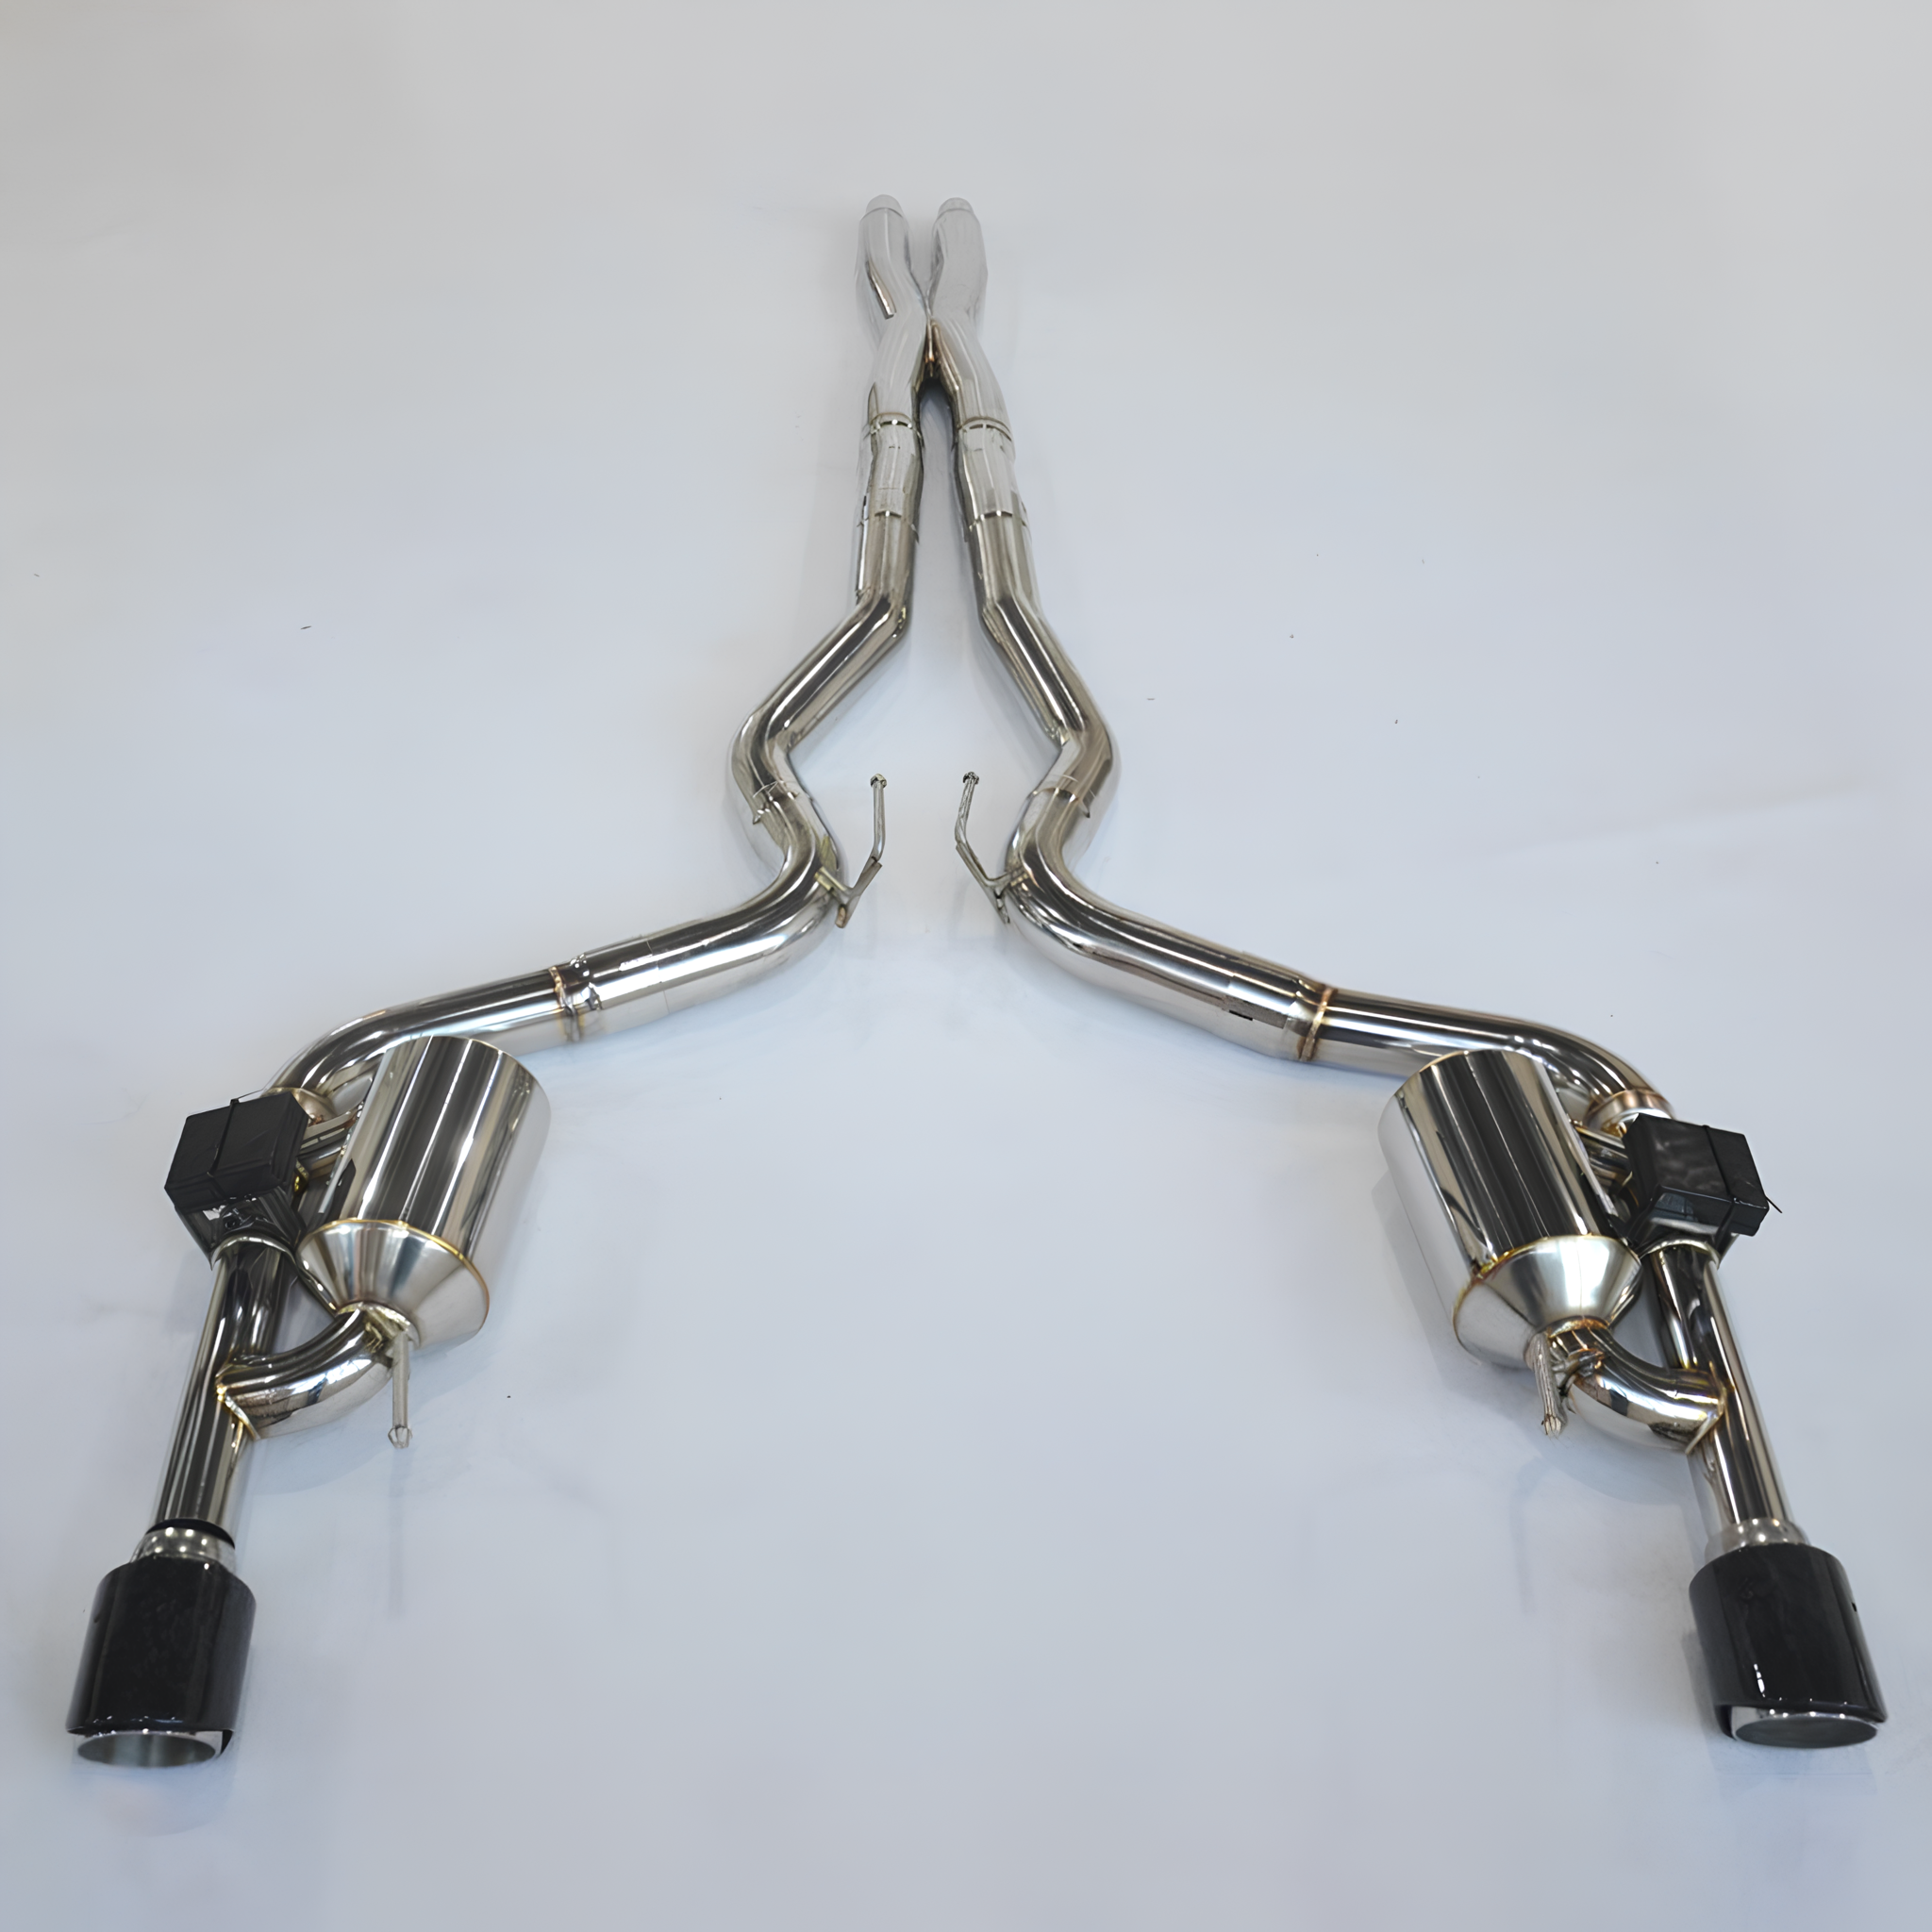 Rstype EXHAUST CATBACK For Ford Mustang 2013-2019 5.0L